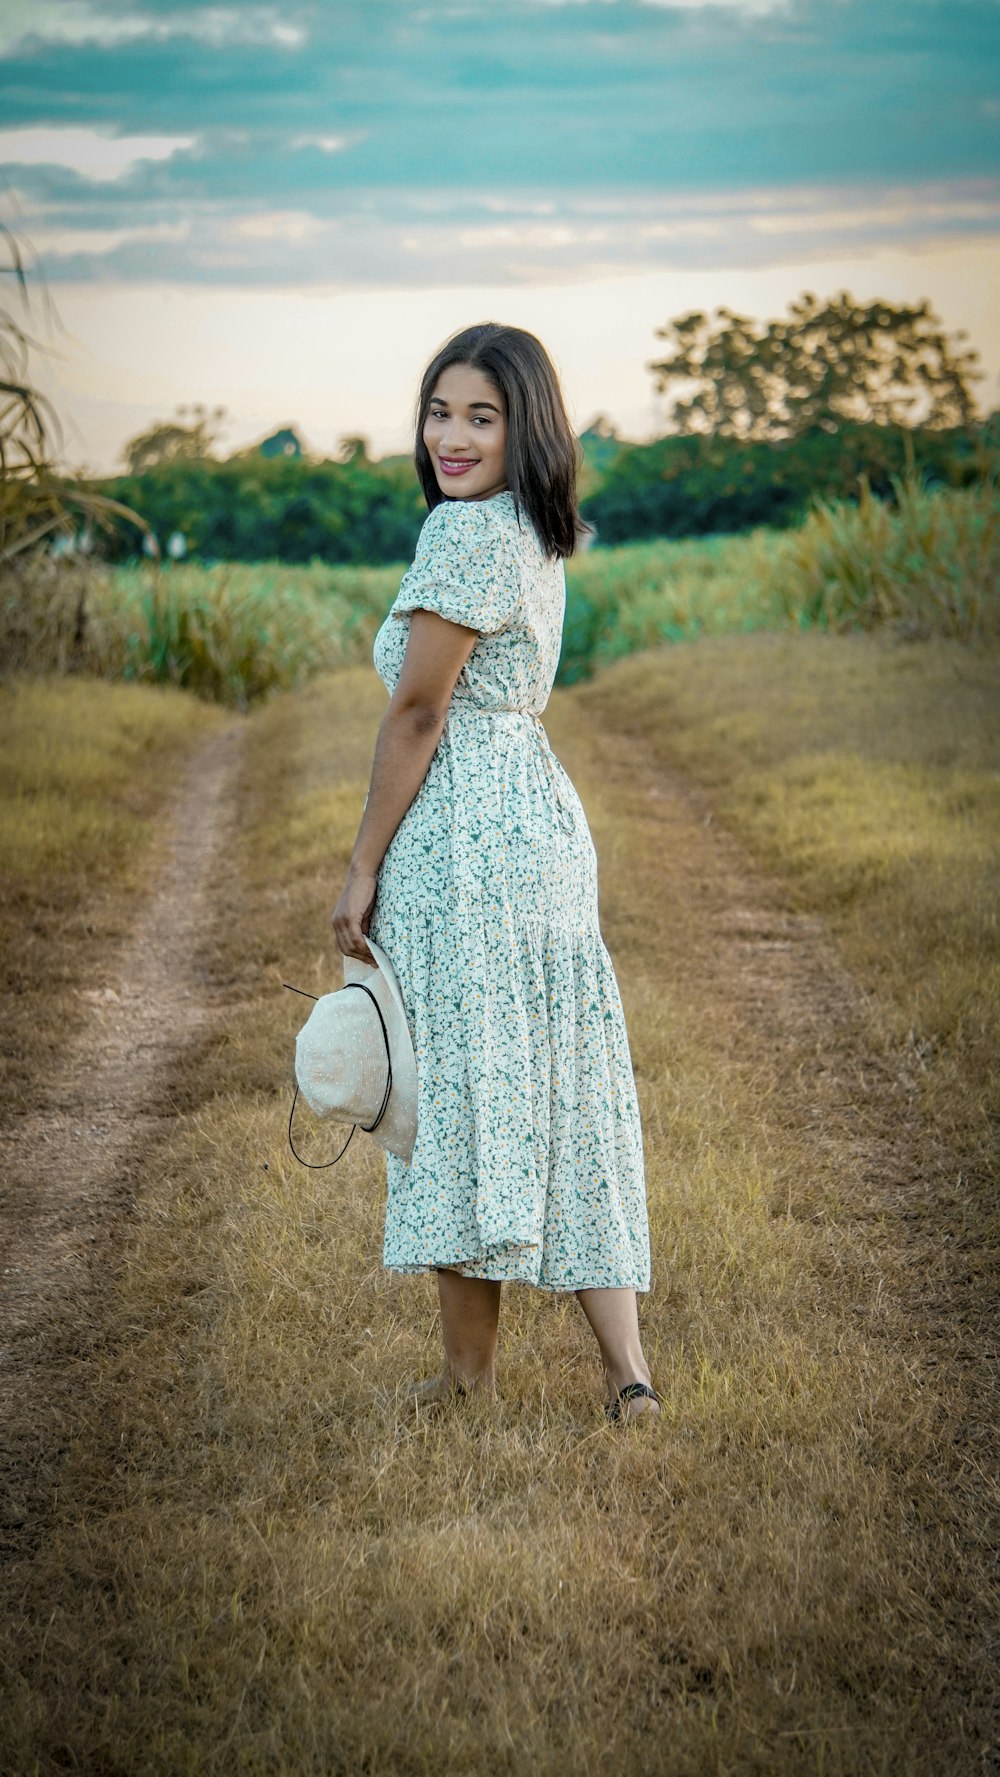 a woman in a dress and hat standing on a dirt road